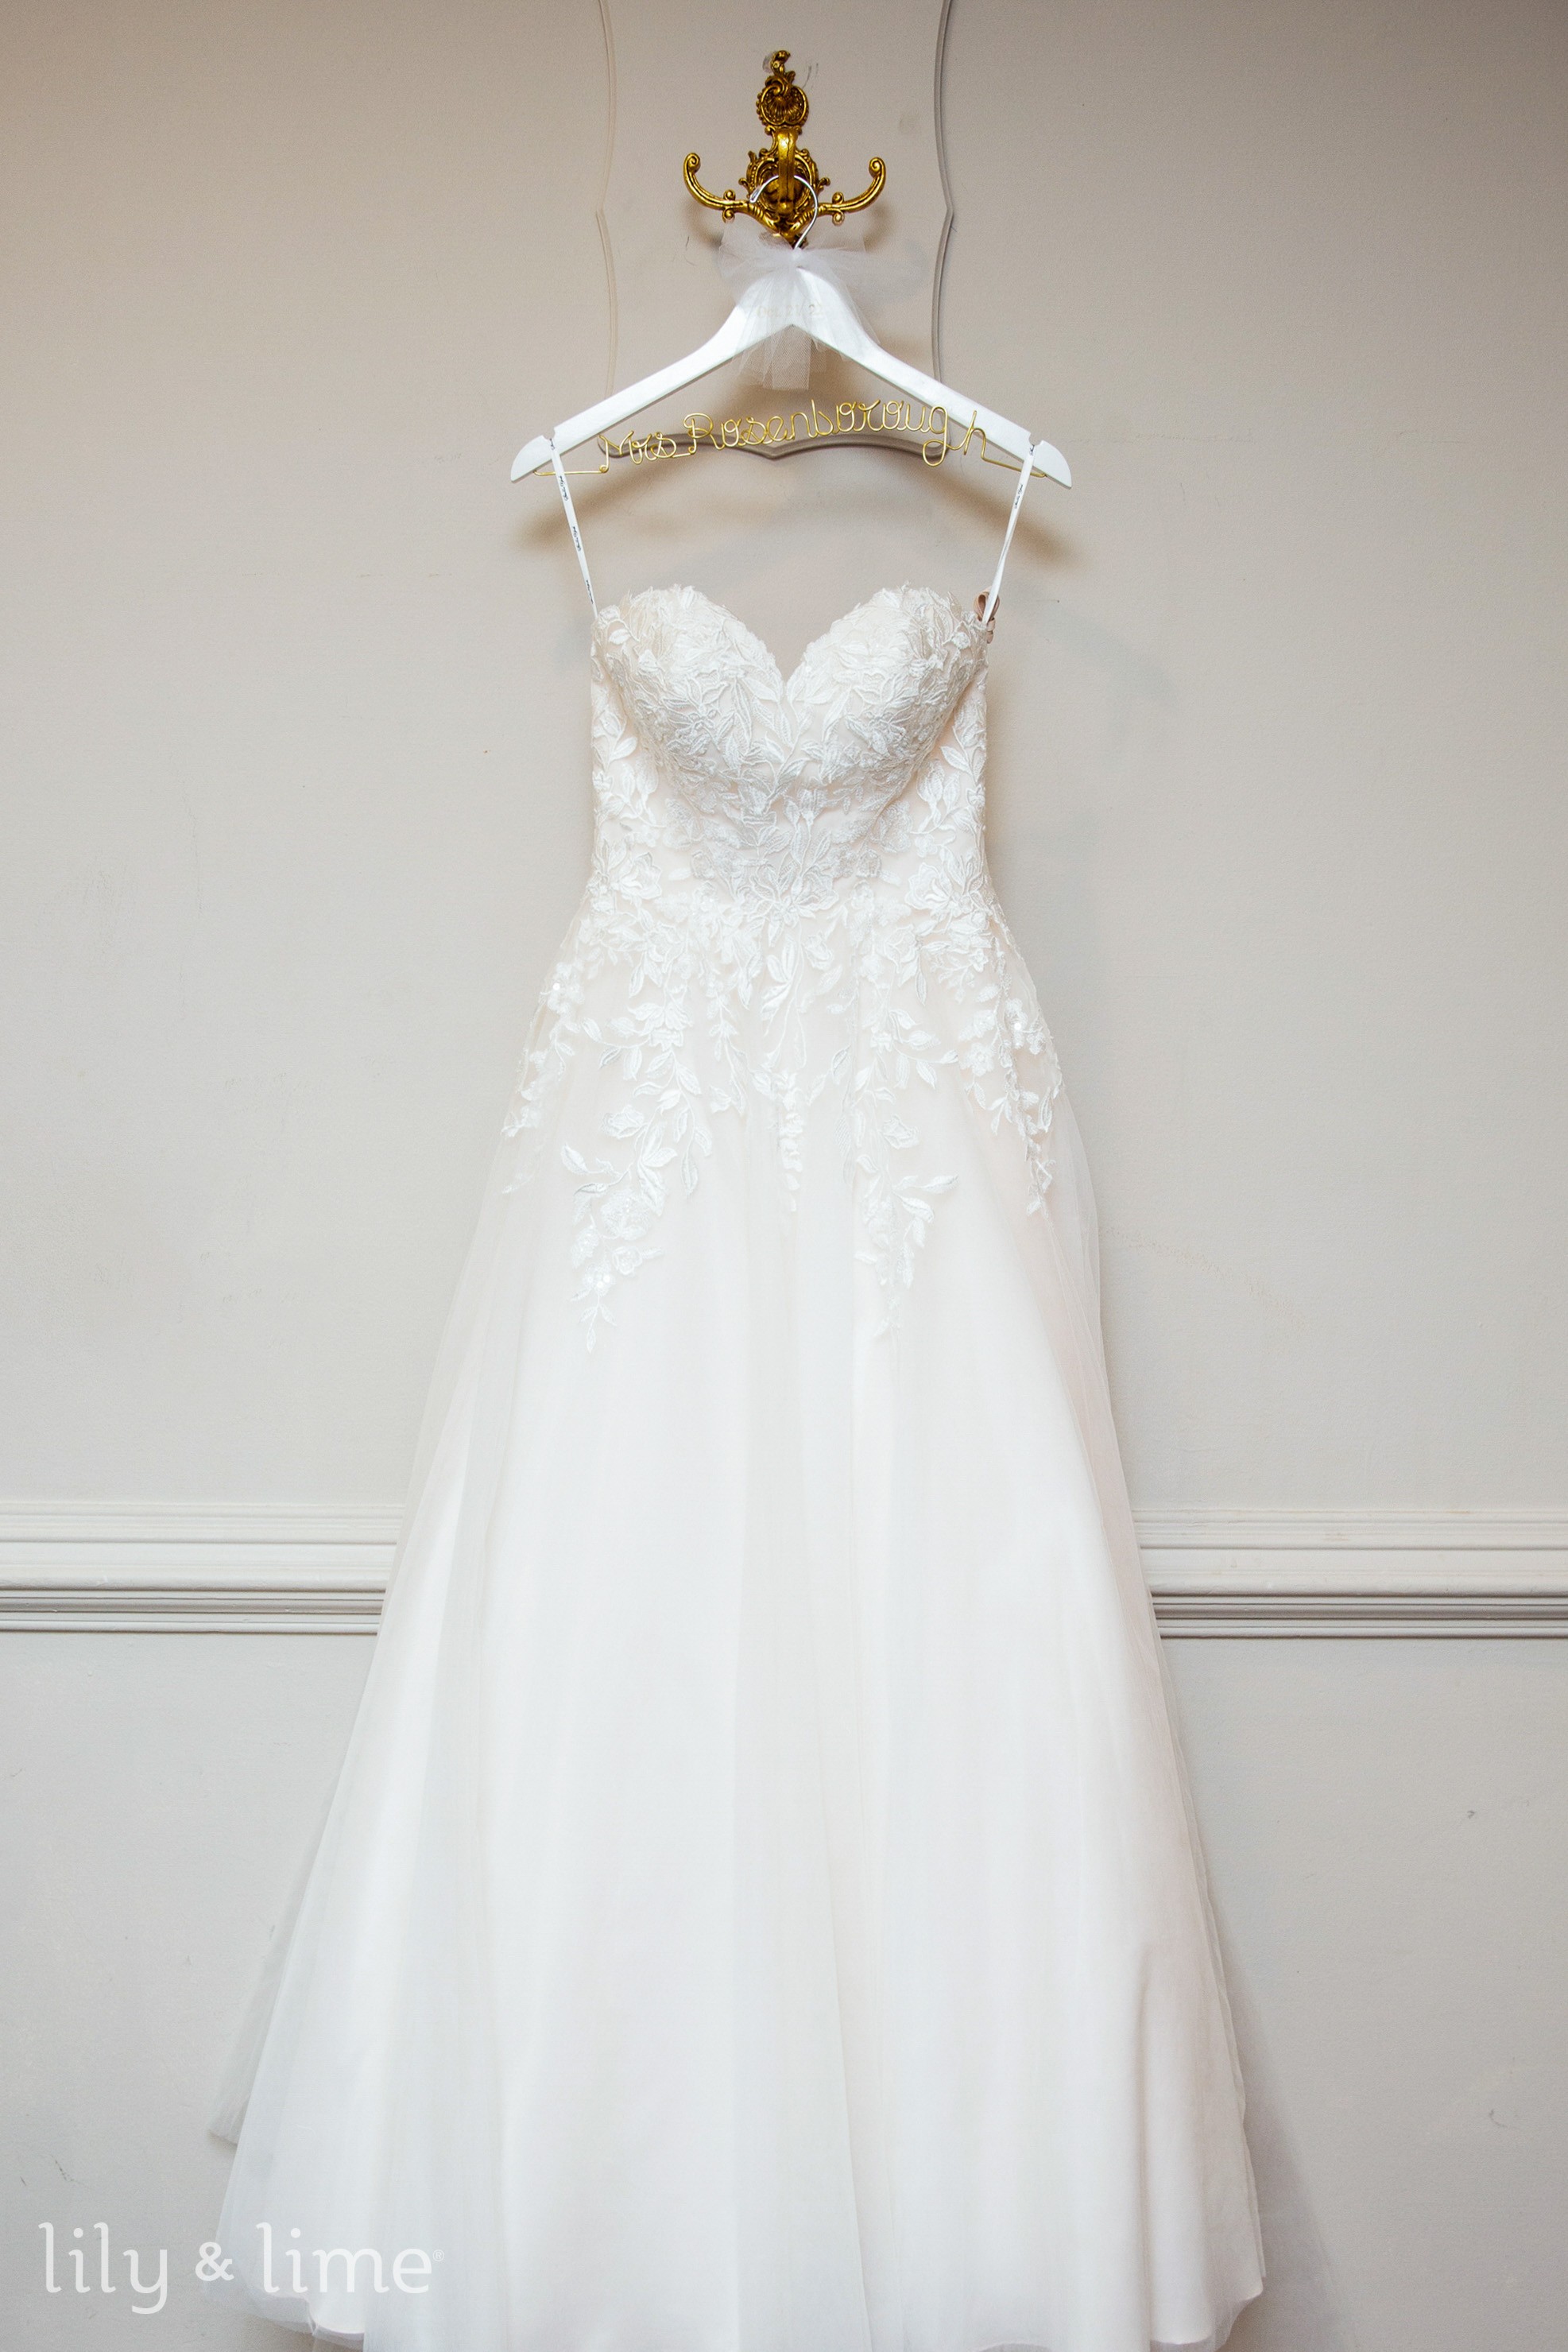 Say Yes To The Dress: Without Breaking The Bank!